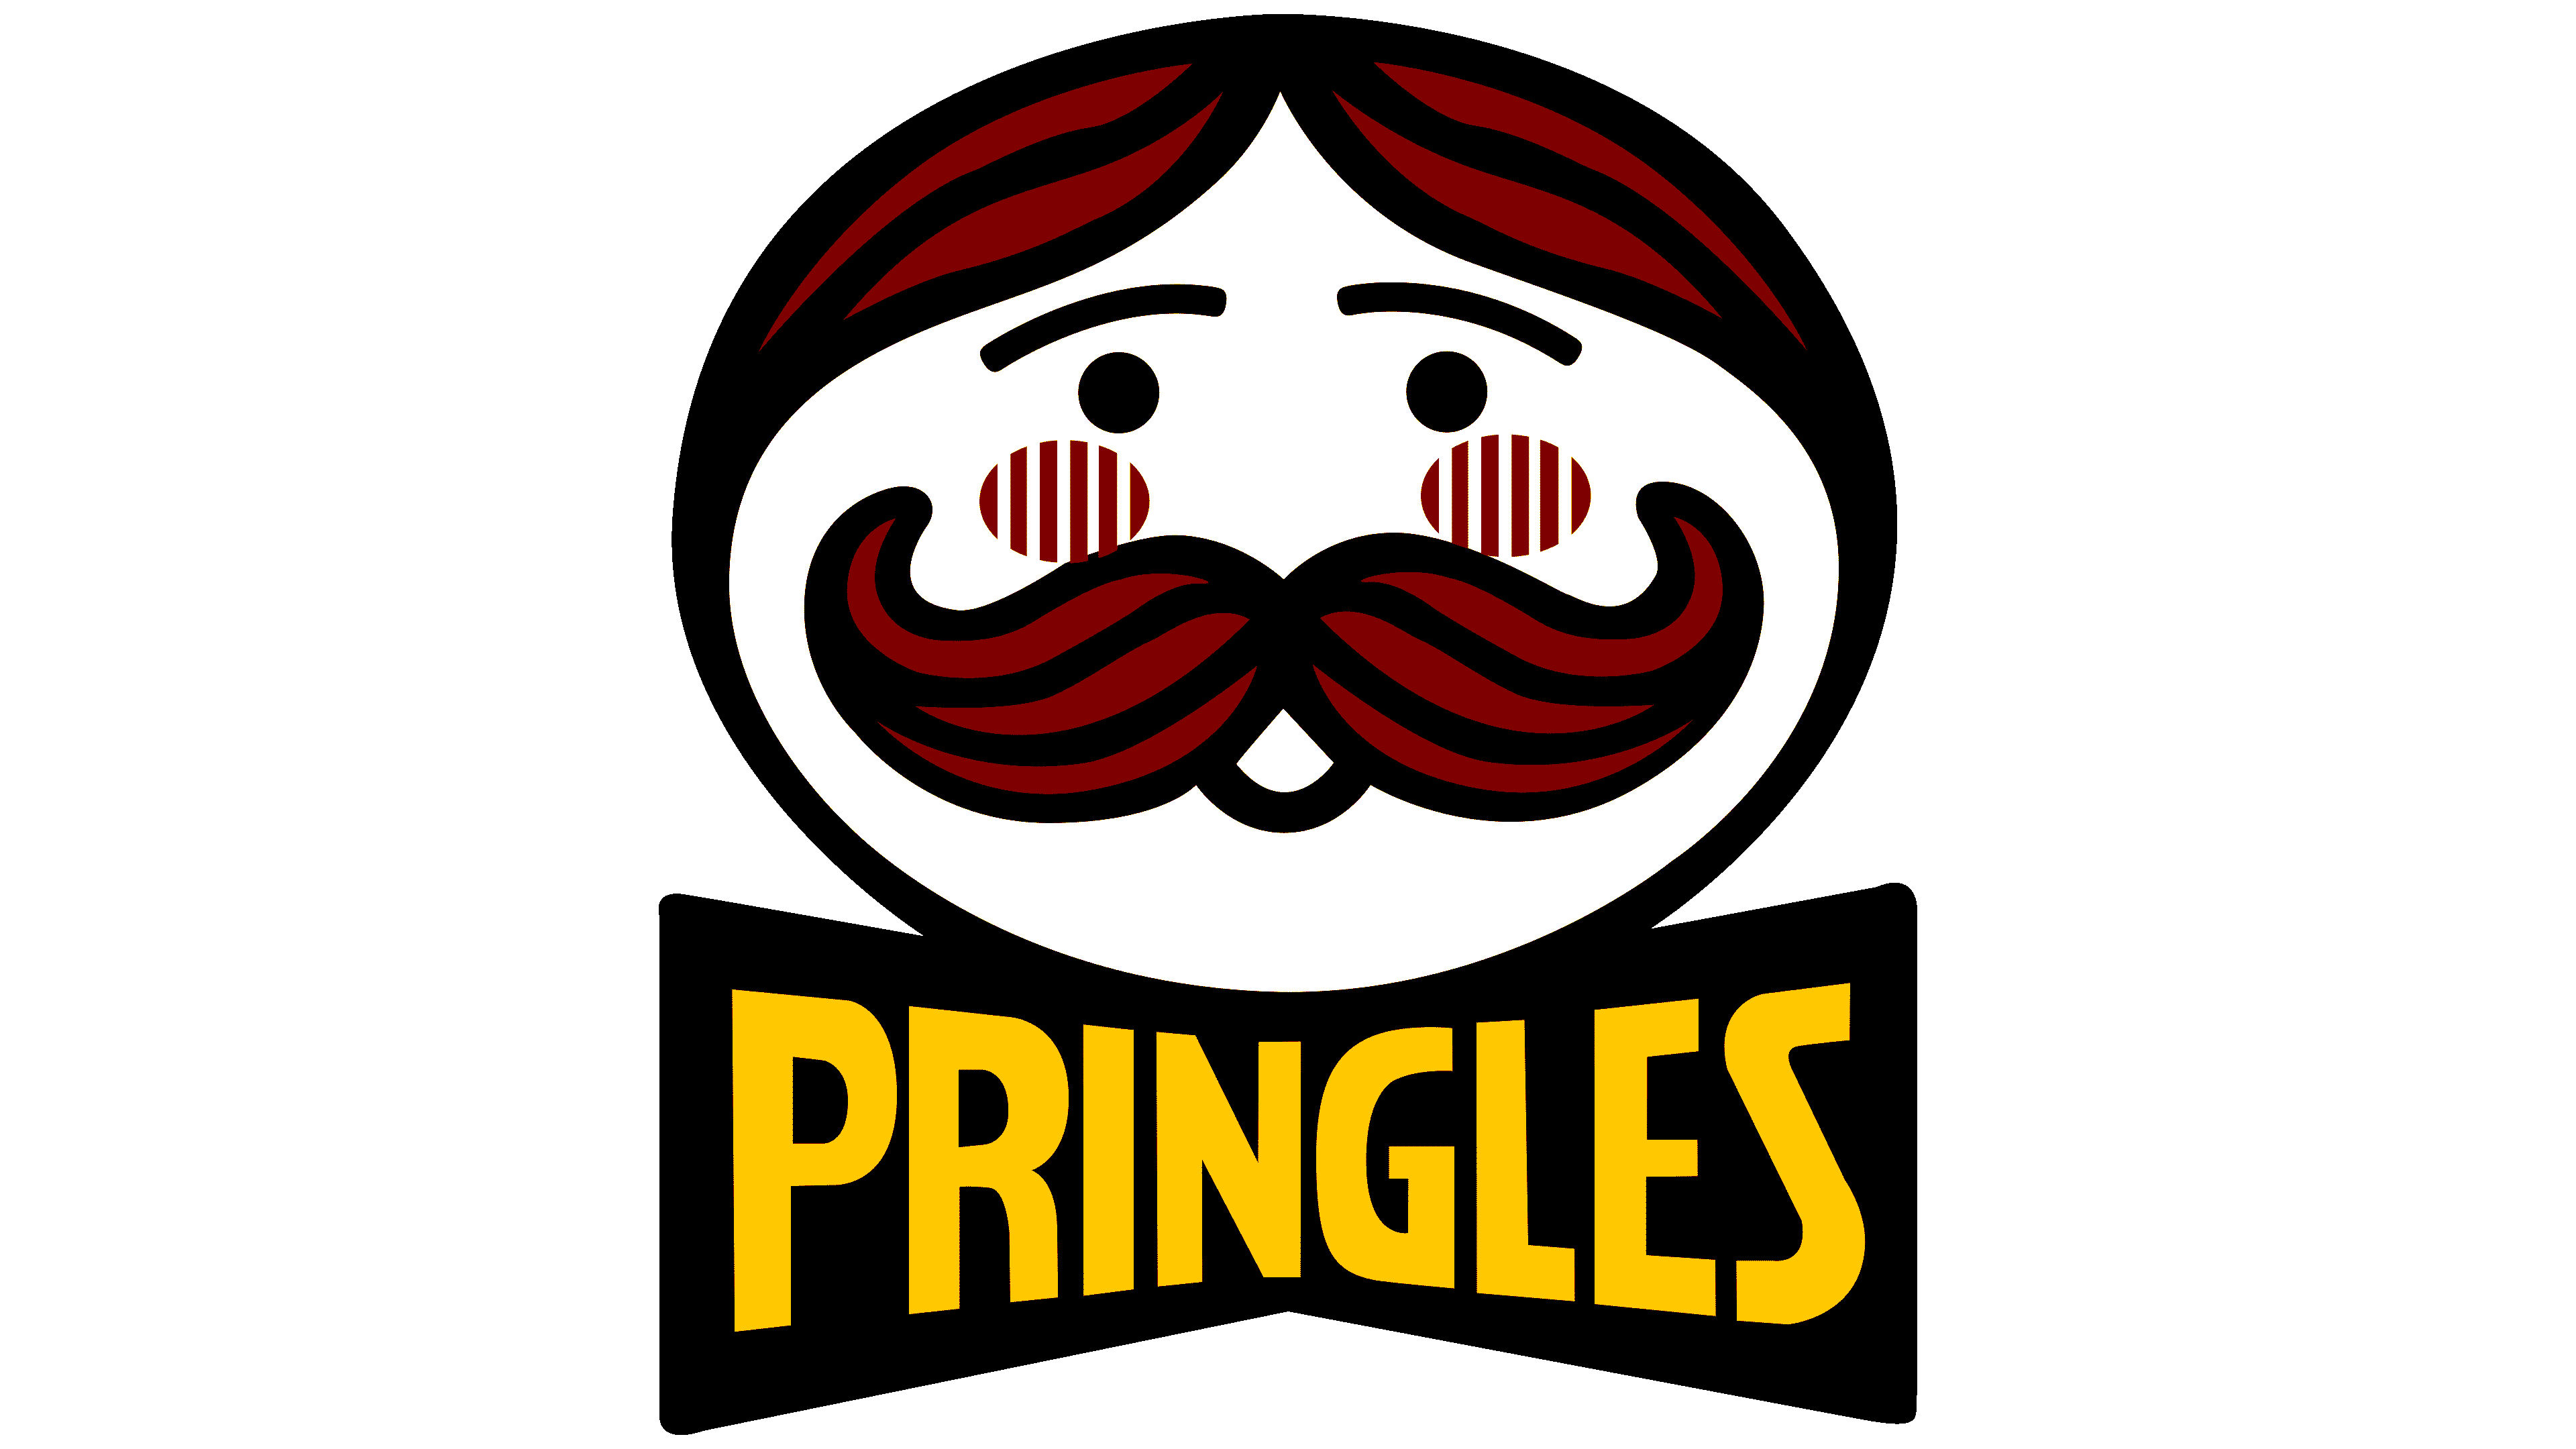 The Complete History Of The Pringles Logo - Hatchwise